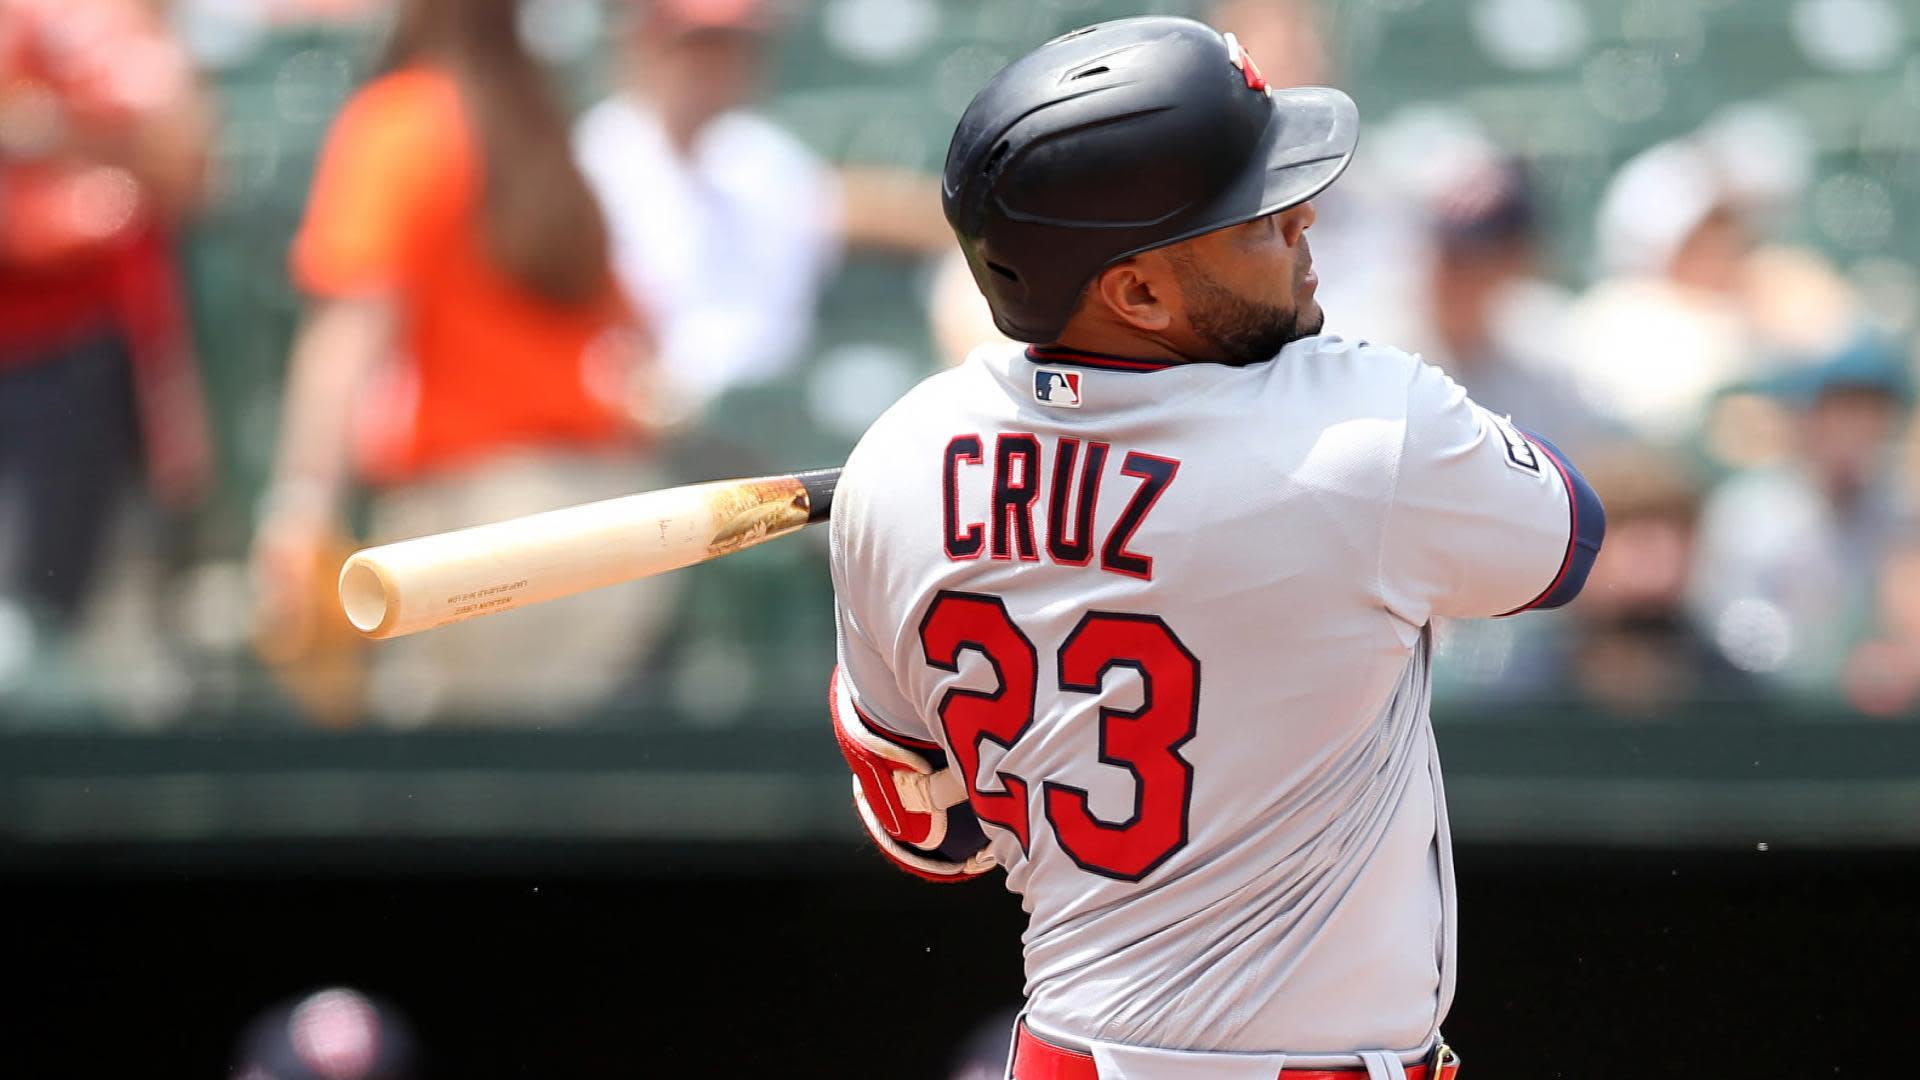 Nelson Cruz joins Rays a day after trade